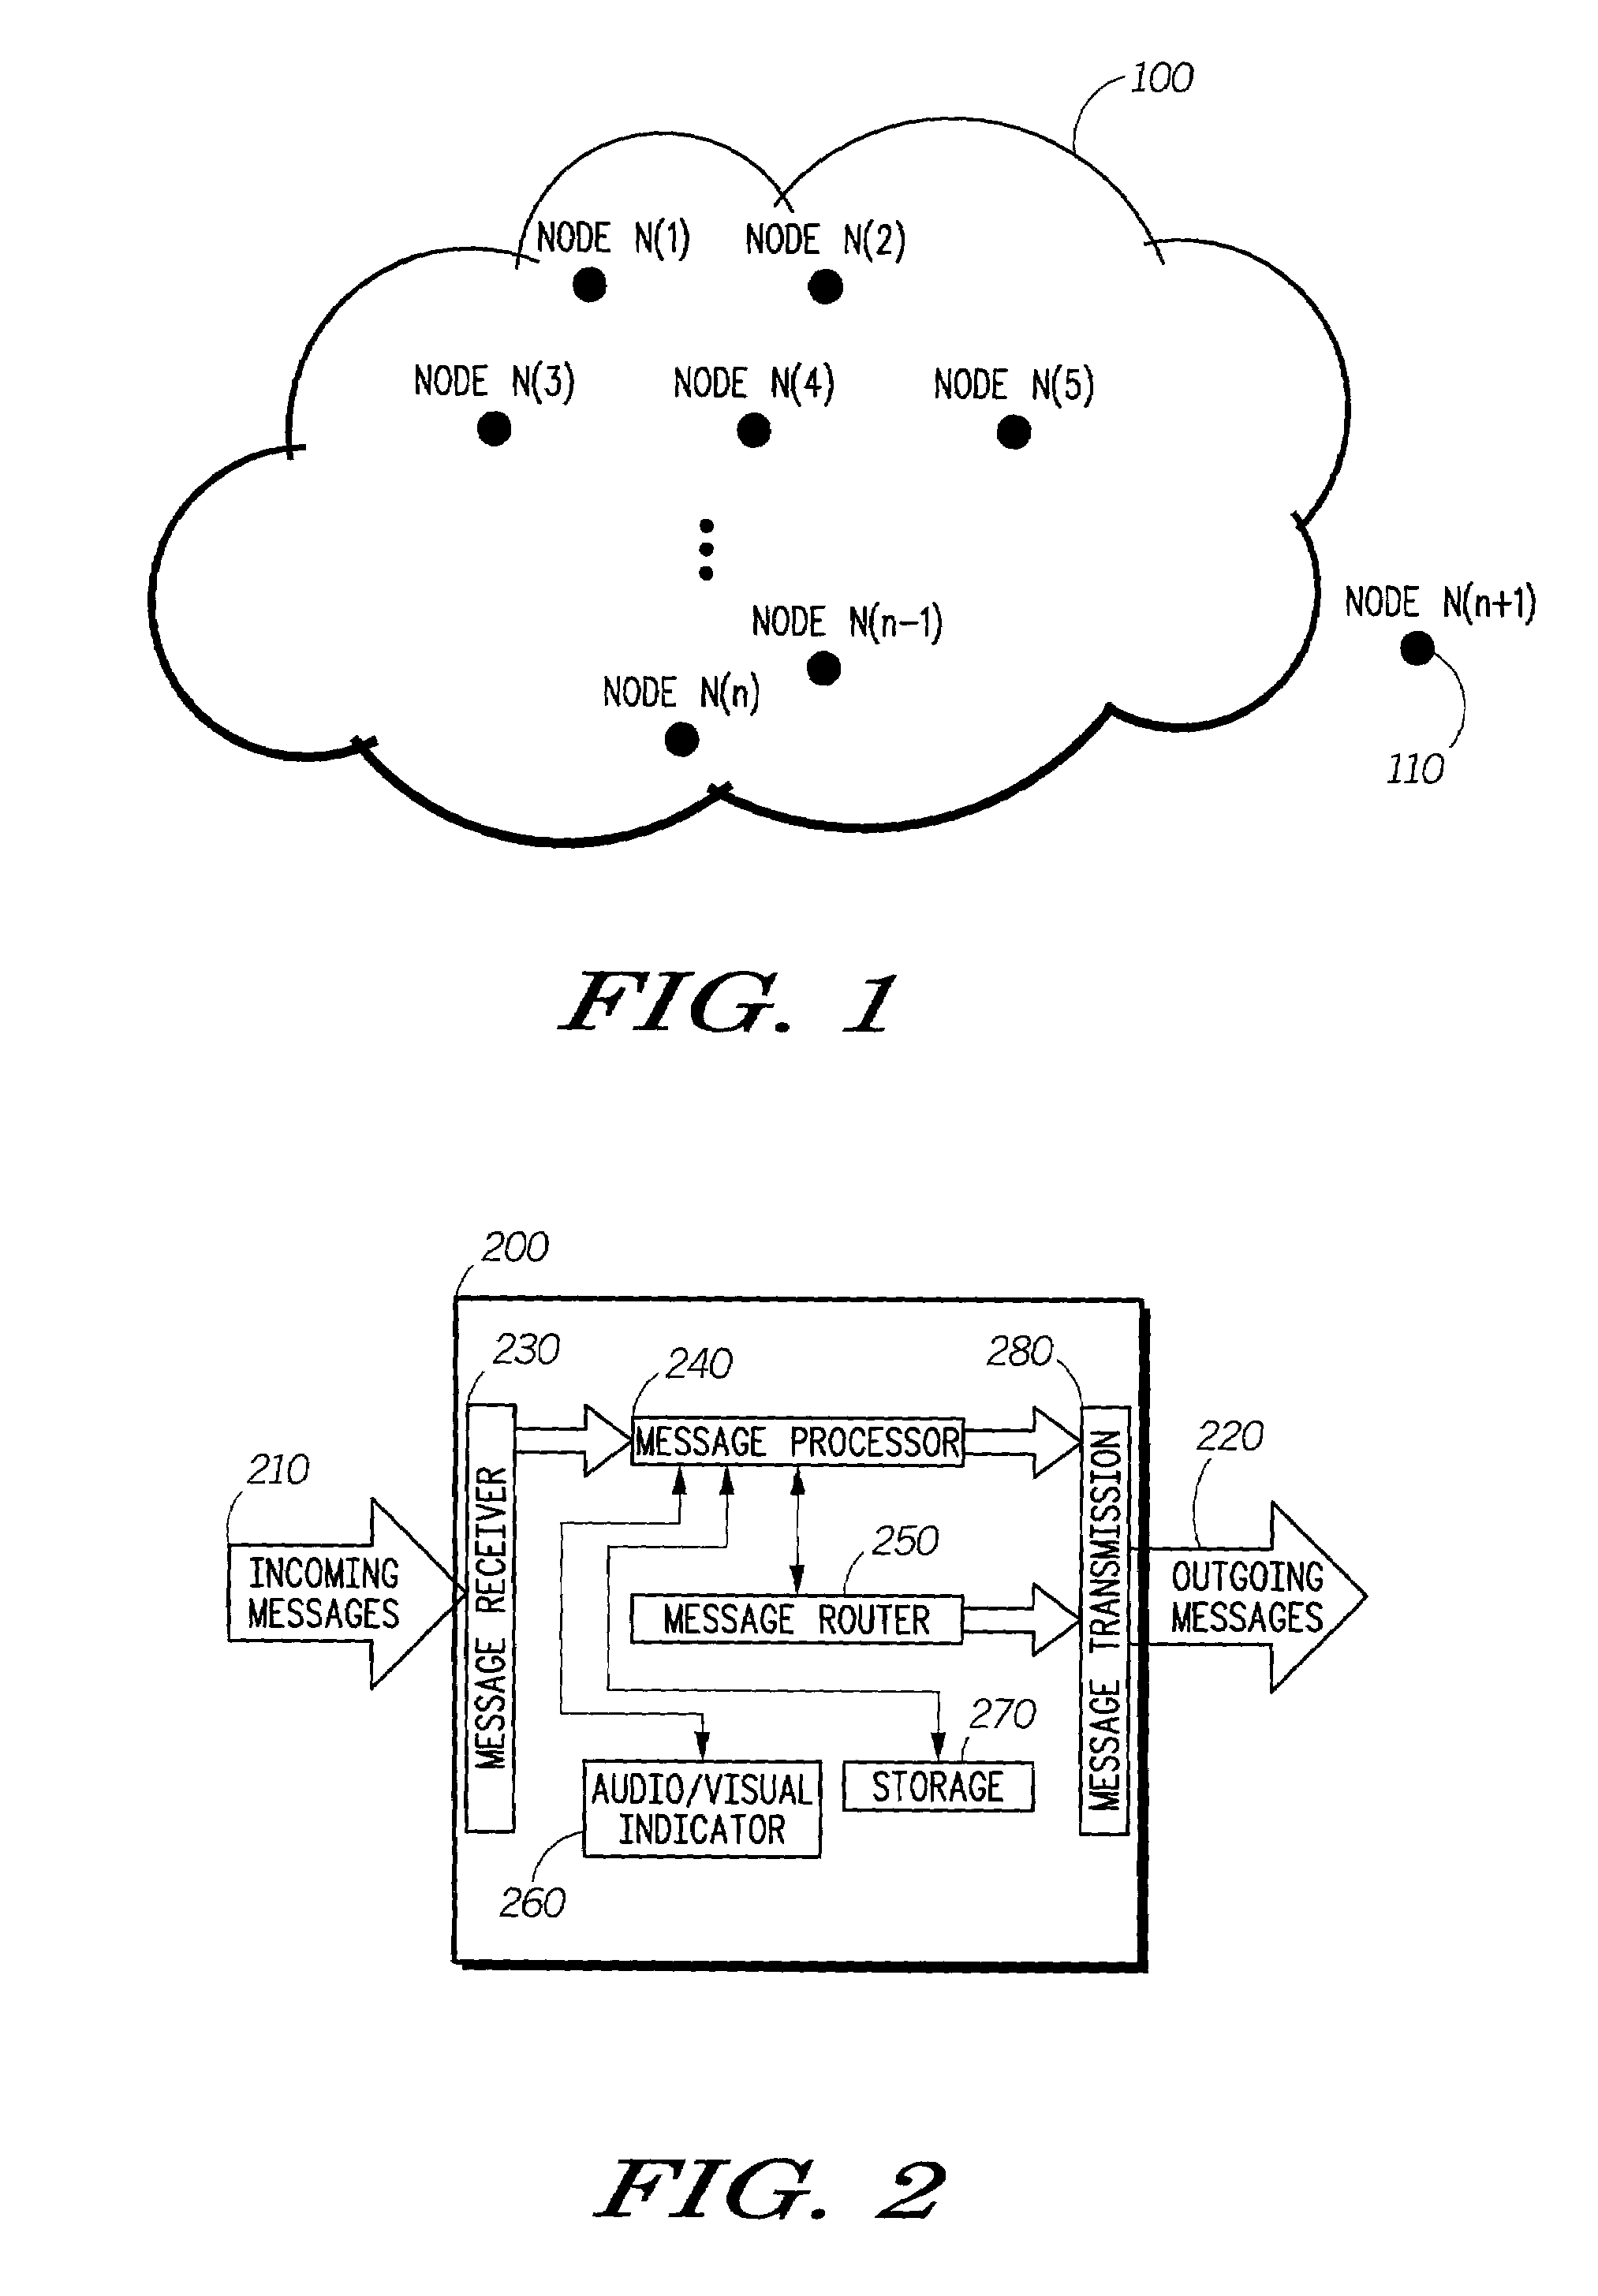 Protocol for self-organizing network using a logical spanning tree backbone